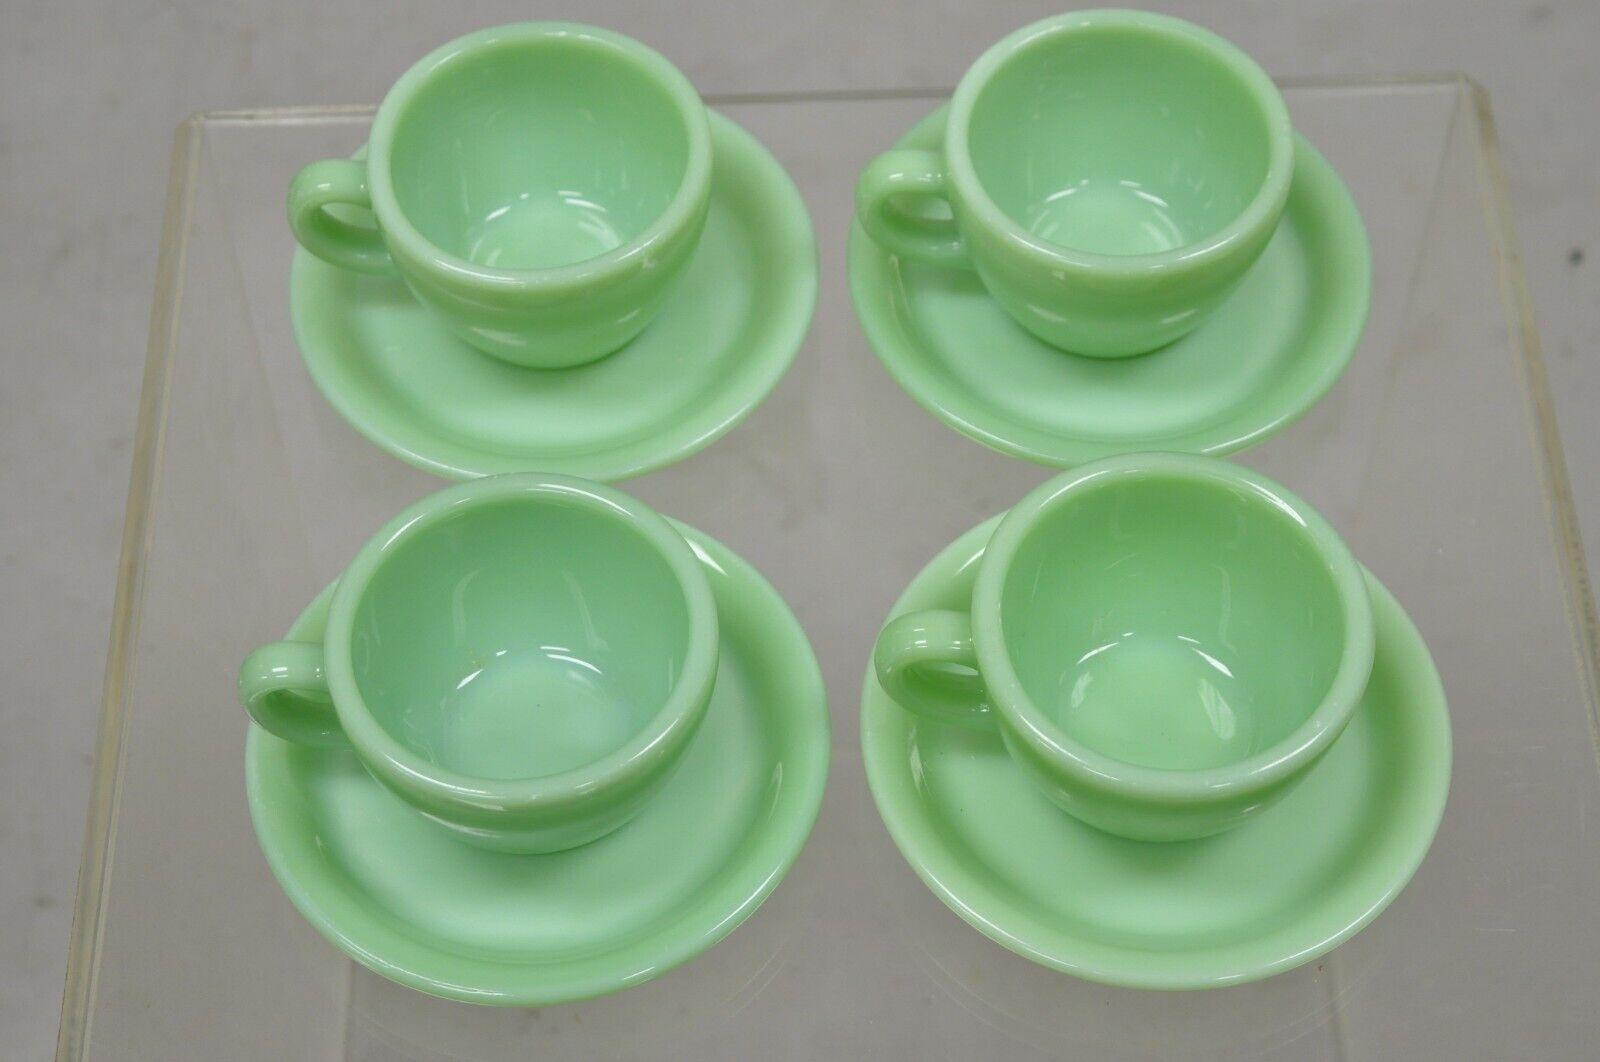 Vintage Fire King Jadeite Green Oven Ware Coffee Cup and Saucer - Set of 4 3